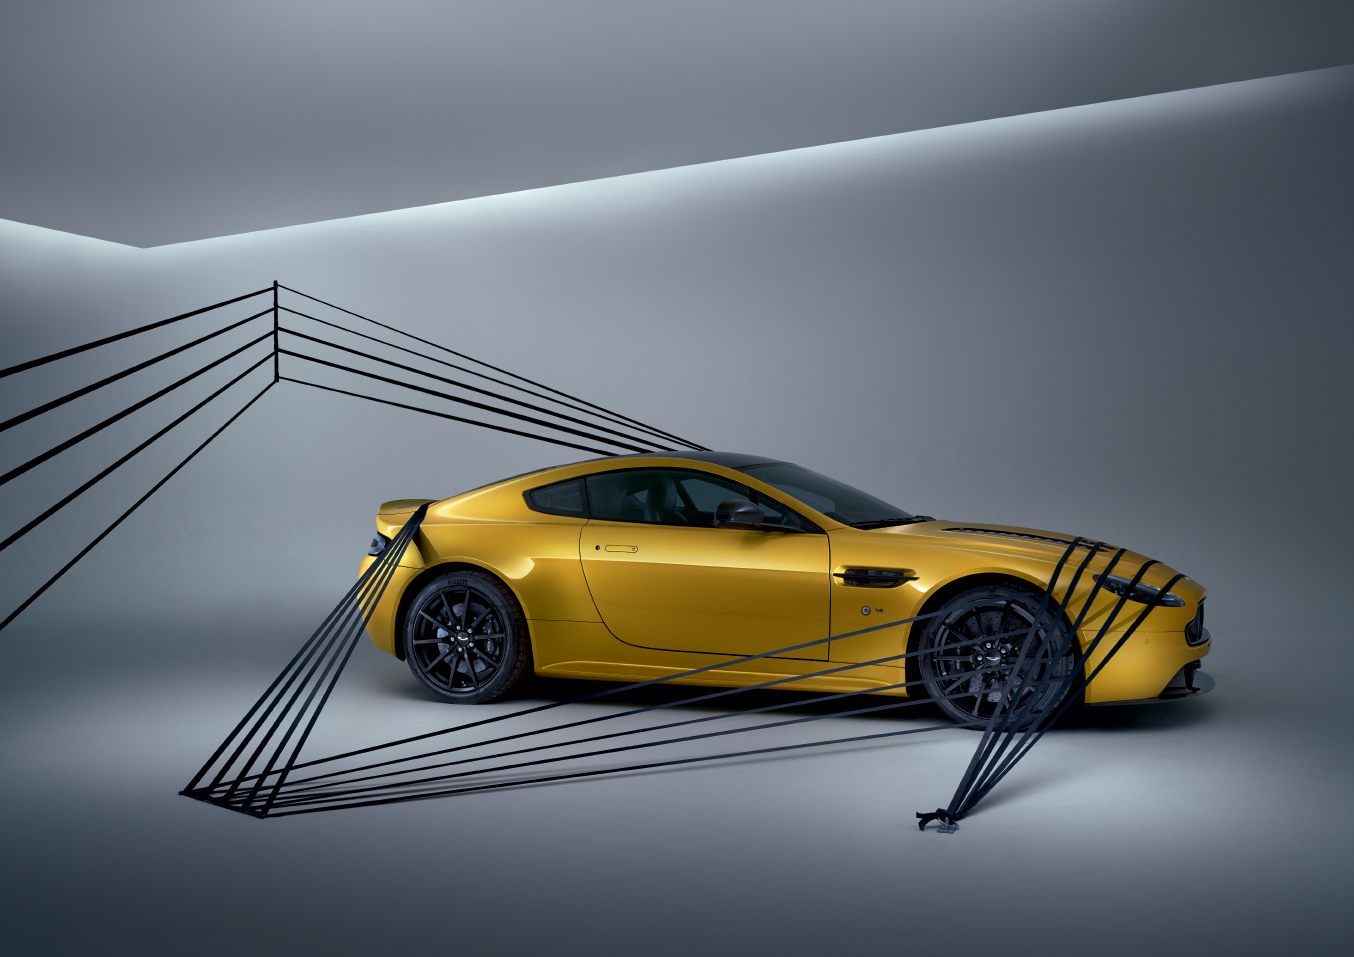 The new V12 Vantage S, the world's most beautiful four-door sports car